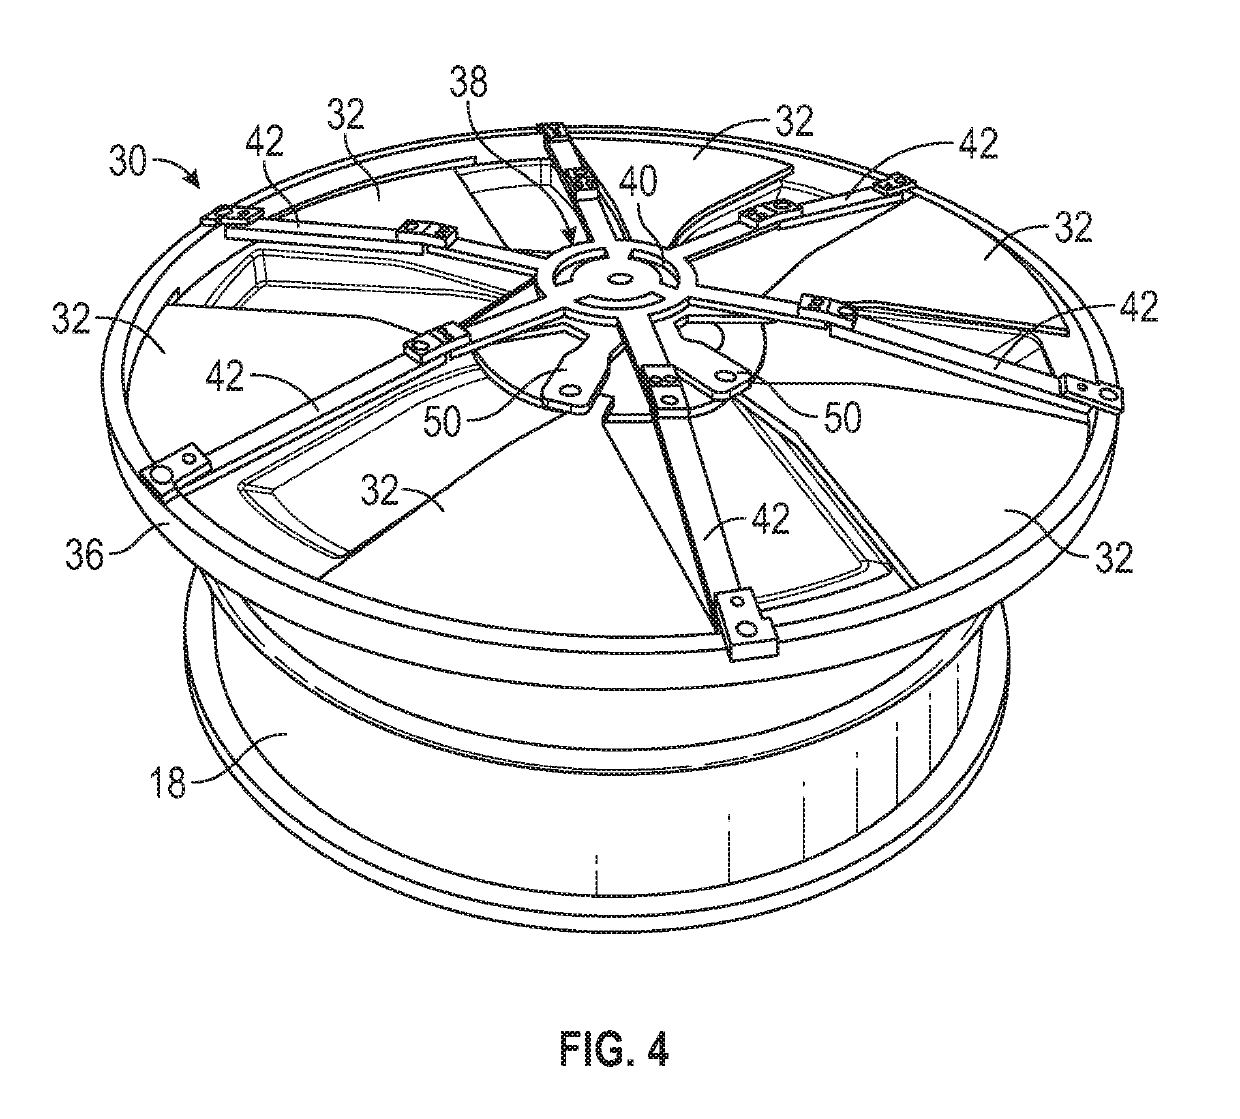 Vehicle wheel assembly including a self-deployed wheel shutter system